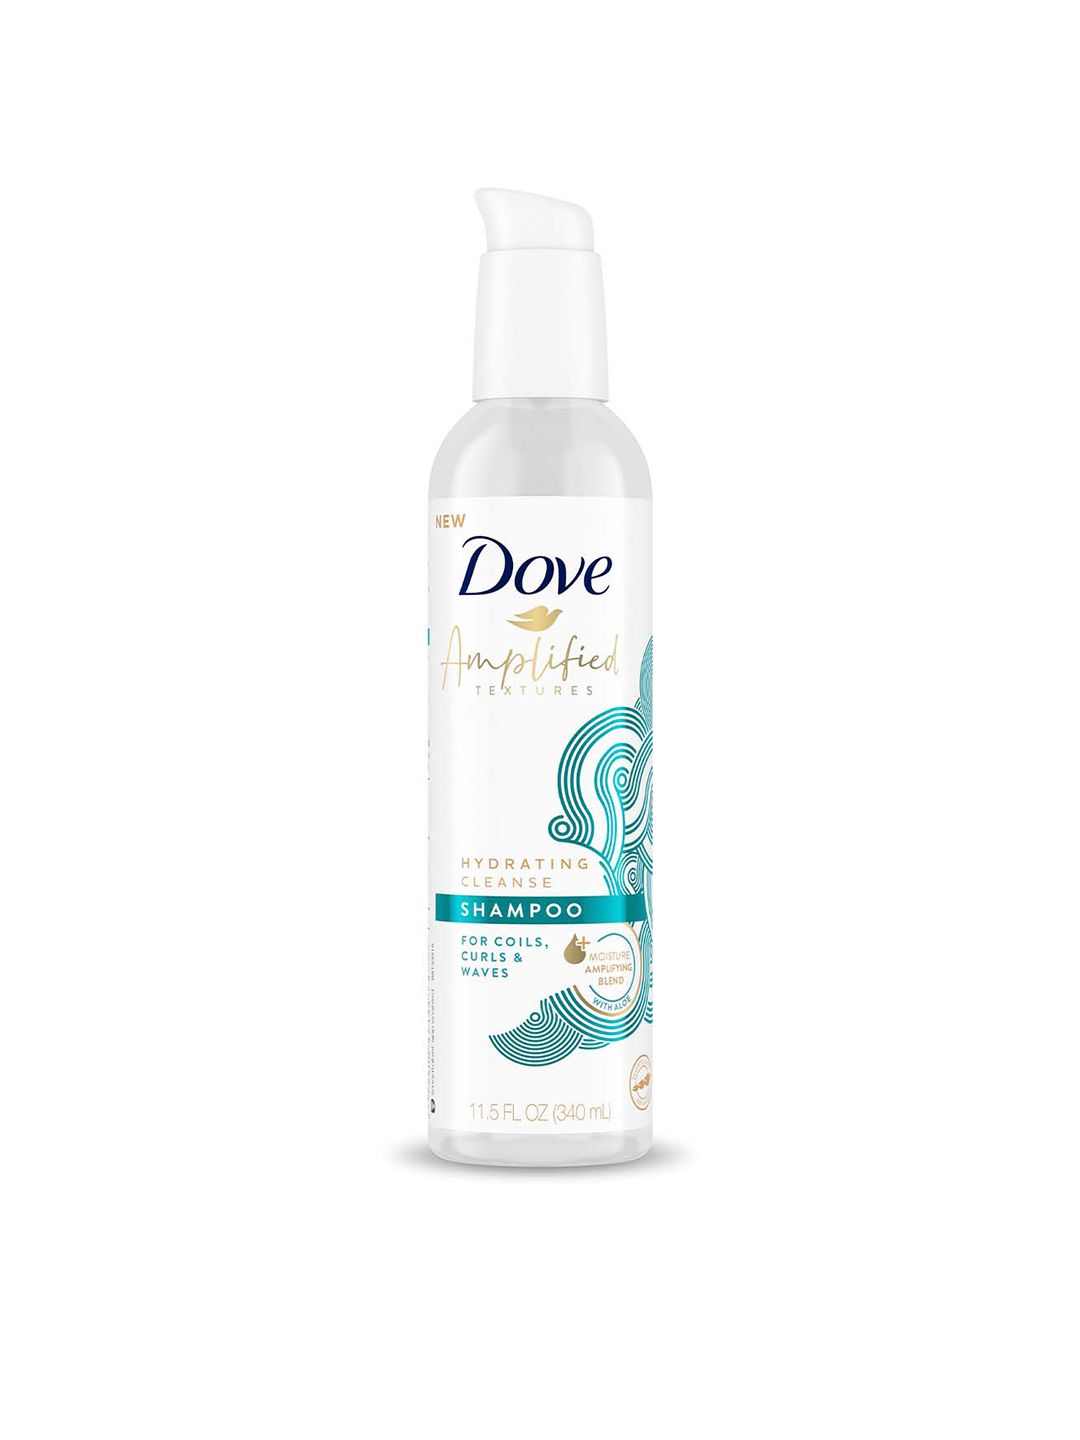 Dove Amplified Textures Hydrating Cleanse Shampoo for Coils, Curls & Wavy Hair - 340 ml Price in India